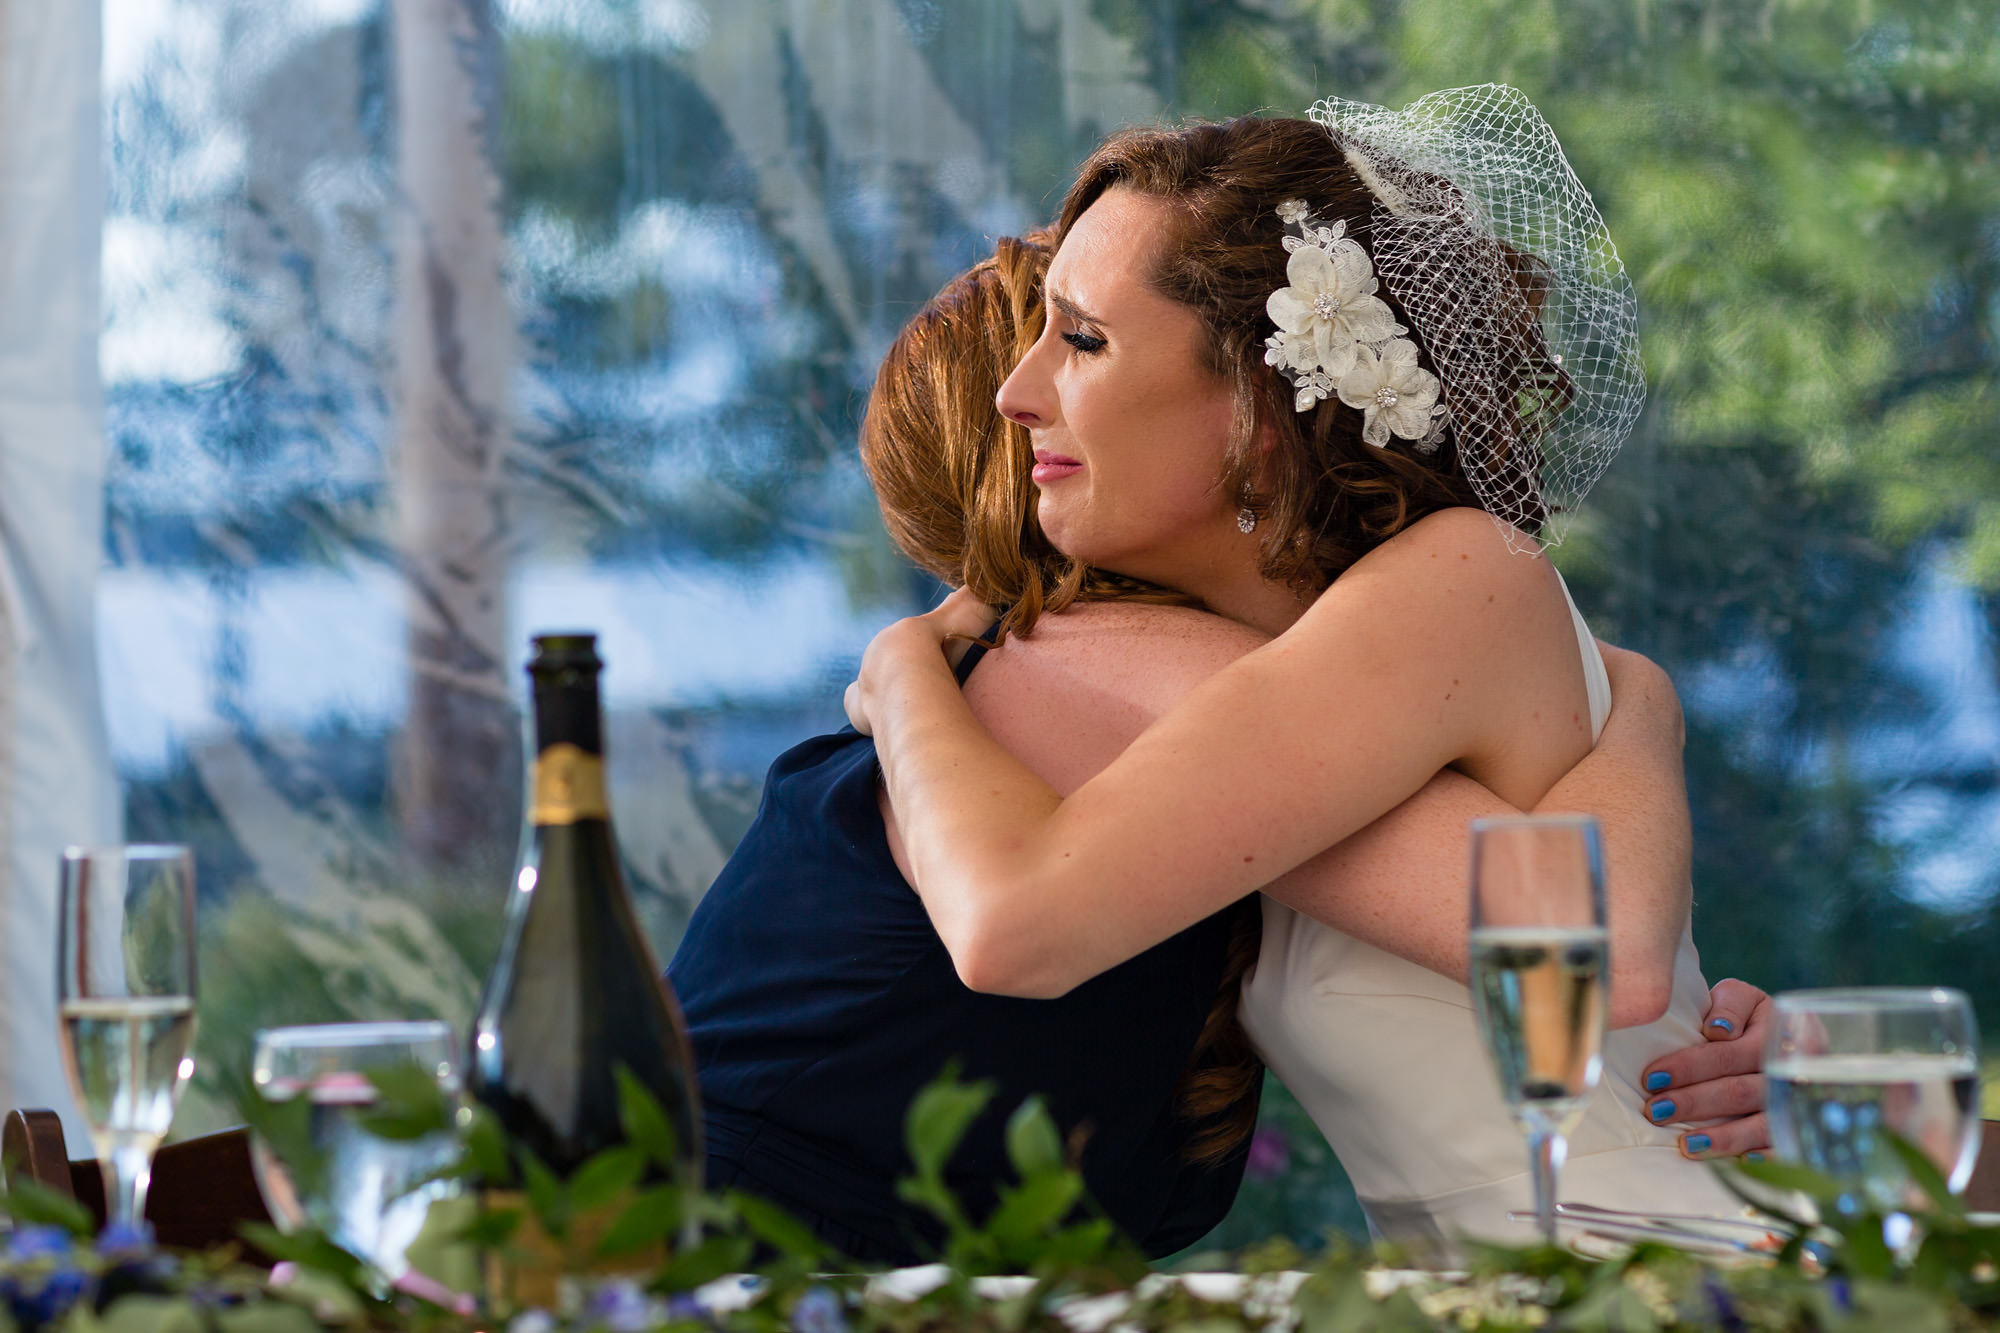 A documentary wedding photo of a bride hugging her maid of honor.